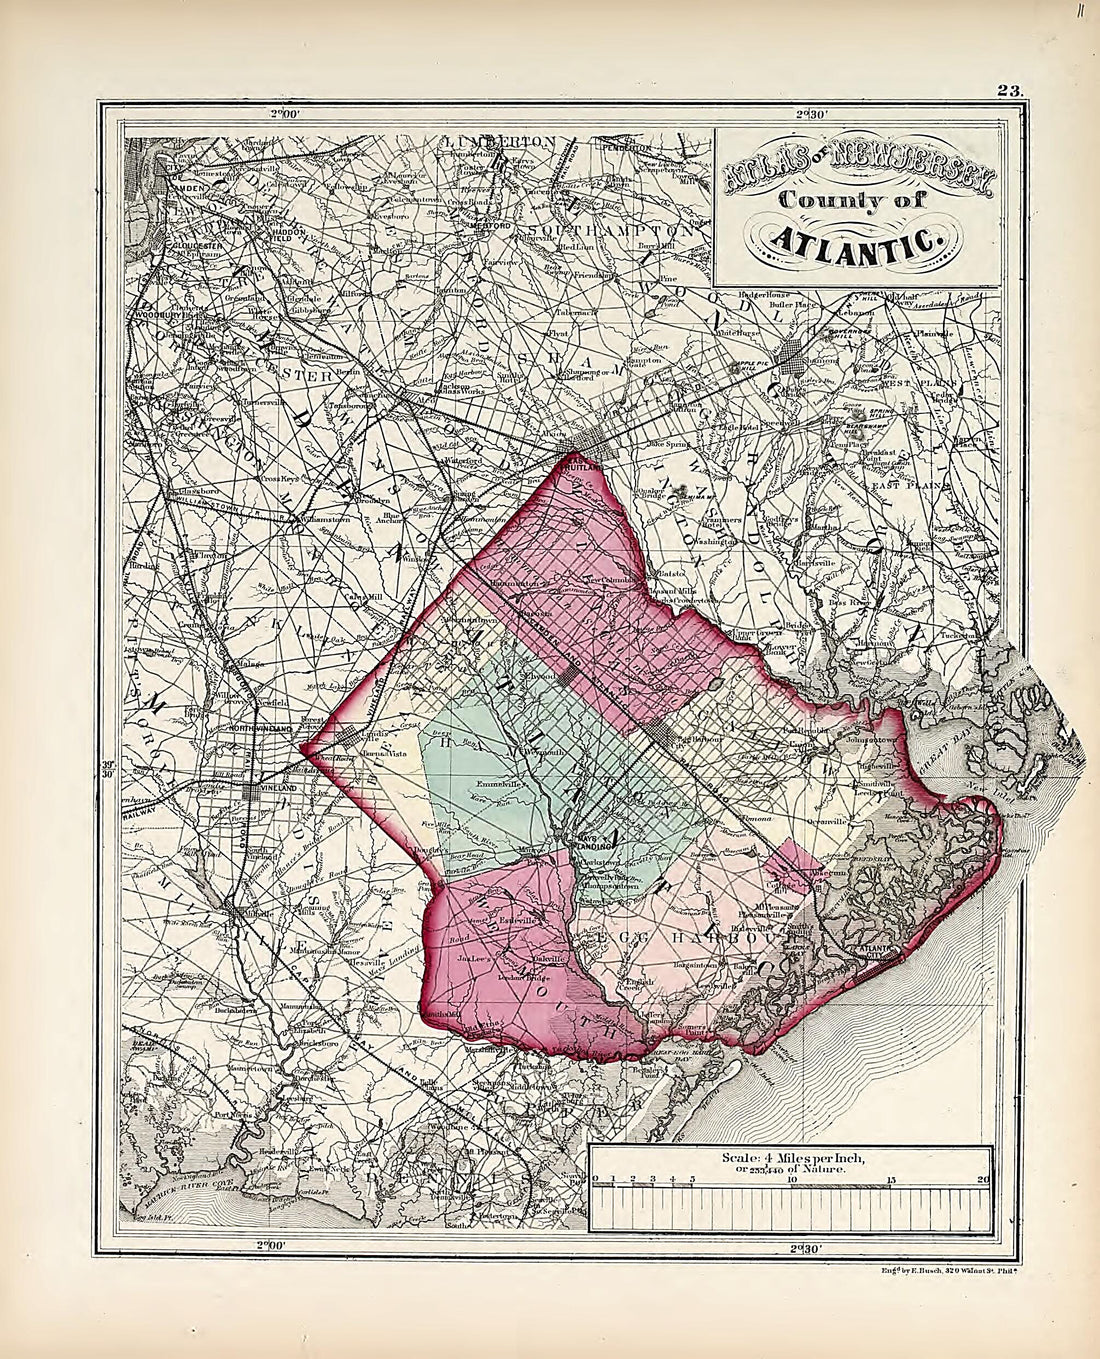 This old map of County of Atlantic from Atlas of the Late Township of Greenville, and the State of New Jersey from 1873 was created by Griffith Morgan Hopkins in 1873